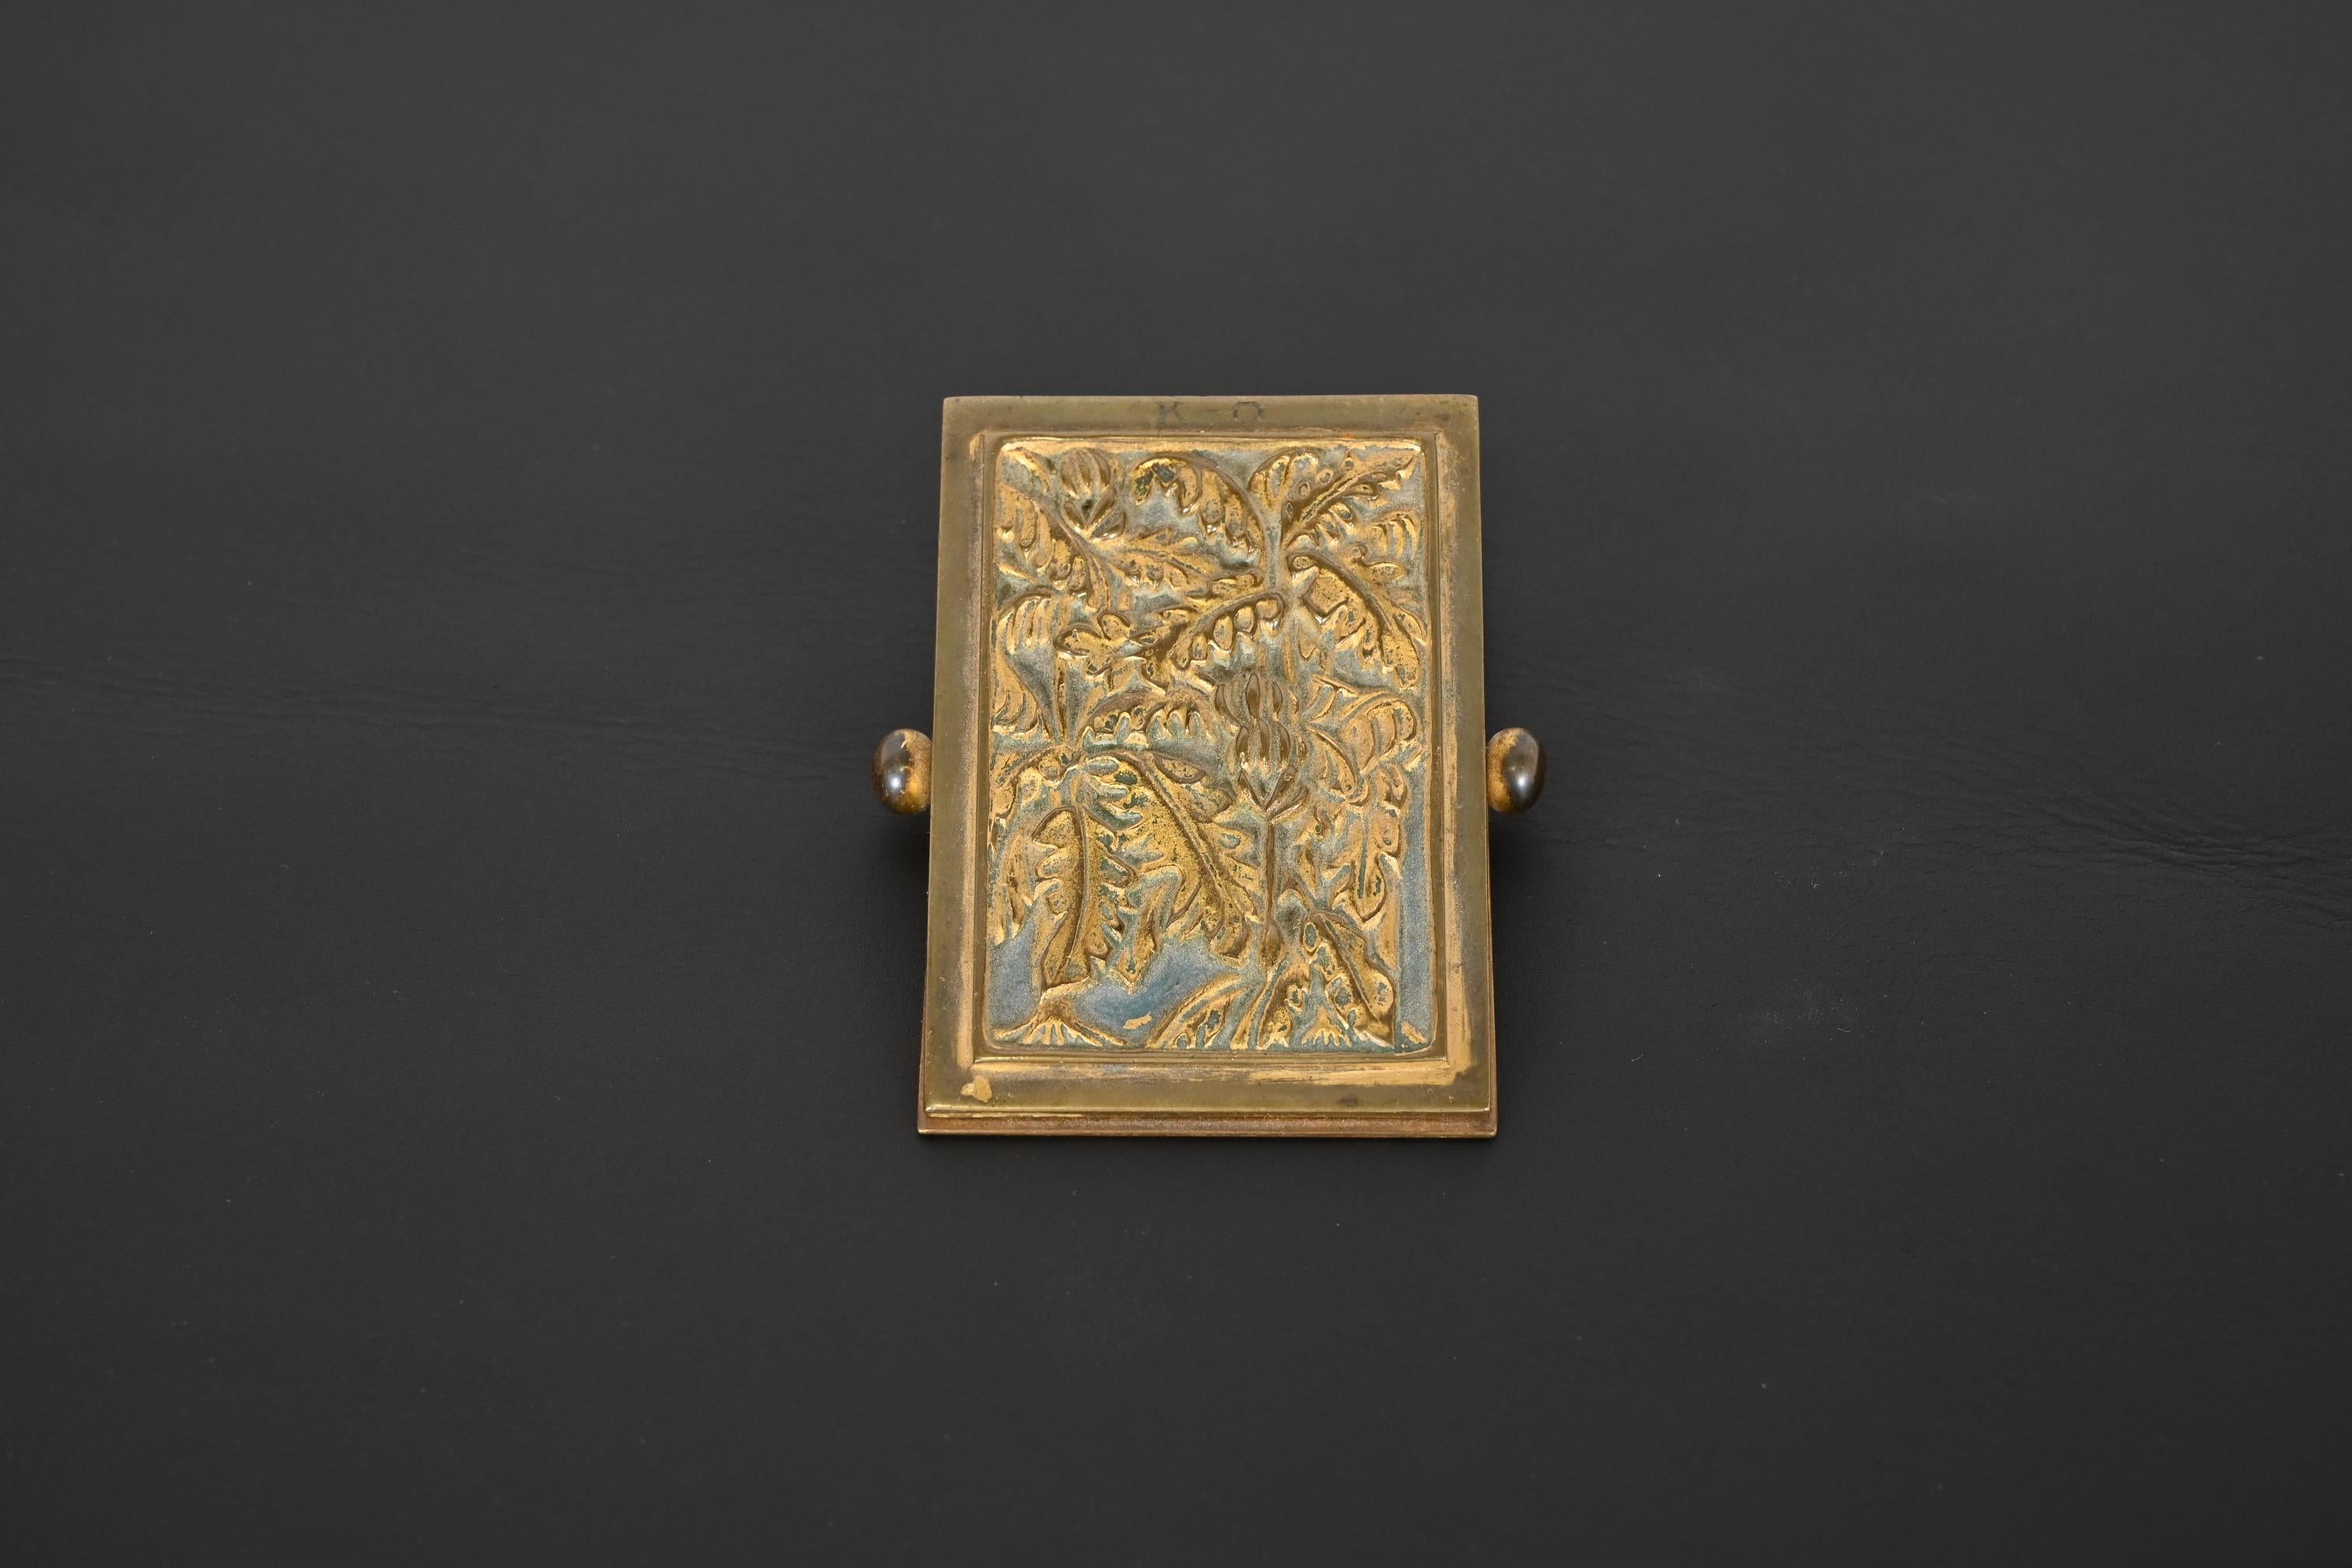 A gorgeous antique bronze paper clip in the Bookmark design

By Tiffany Studios (signed to the underside)

New York, USA, 1918

Measures: 2.75